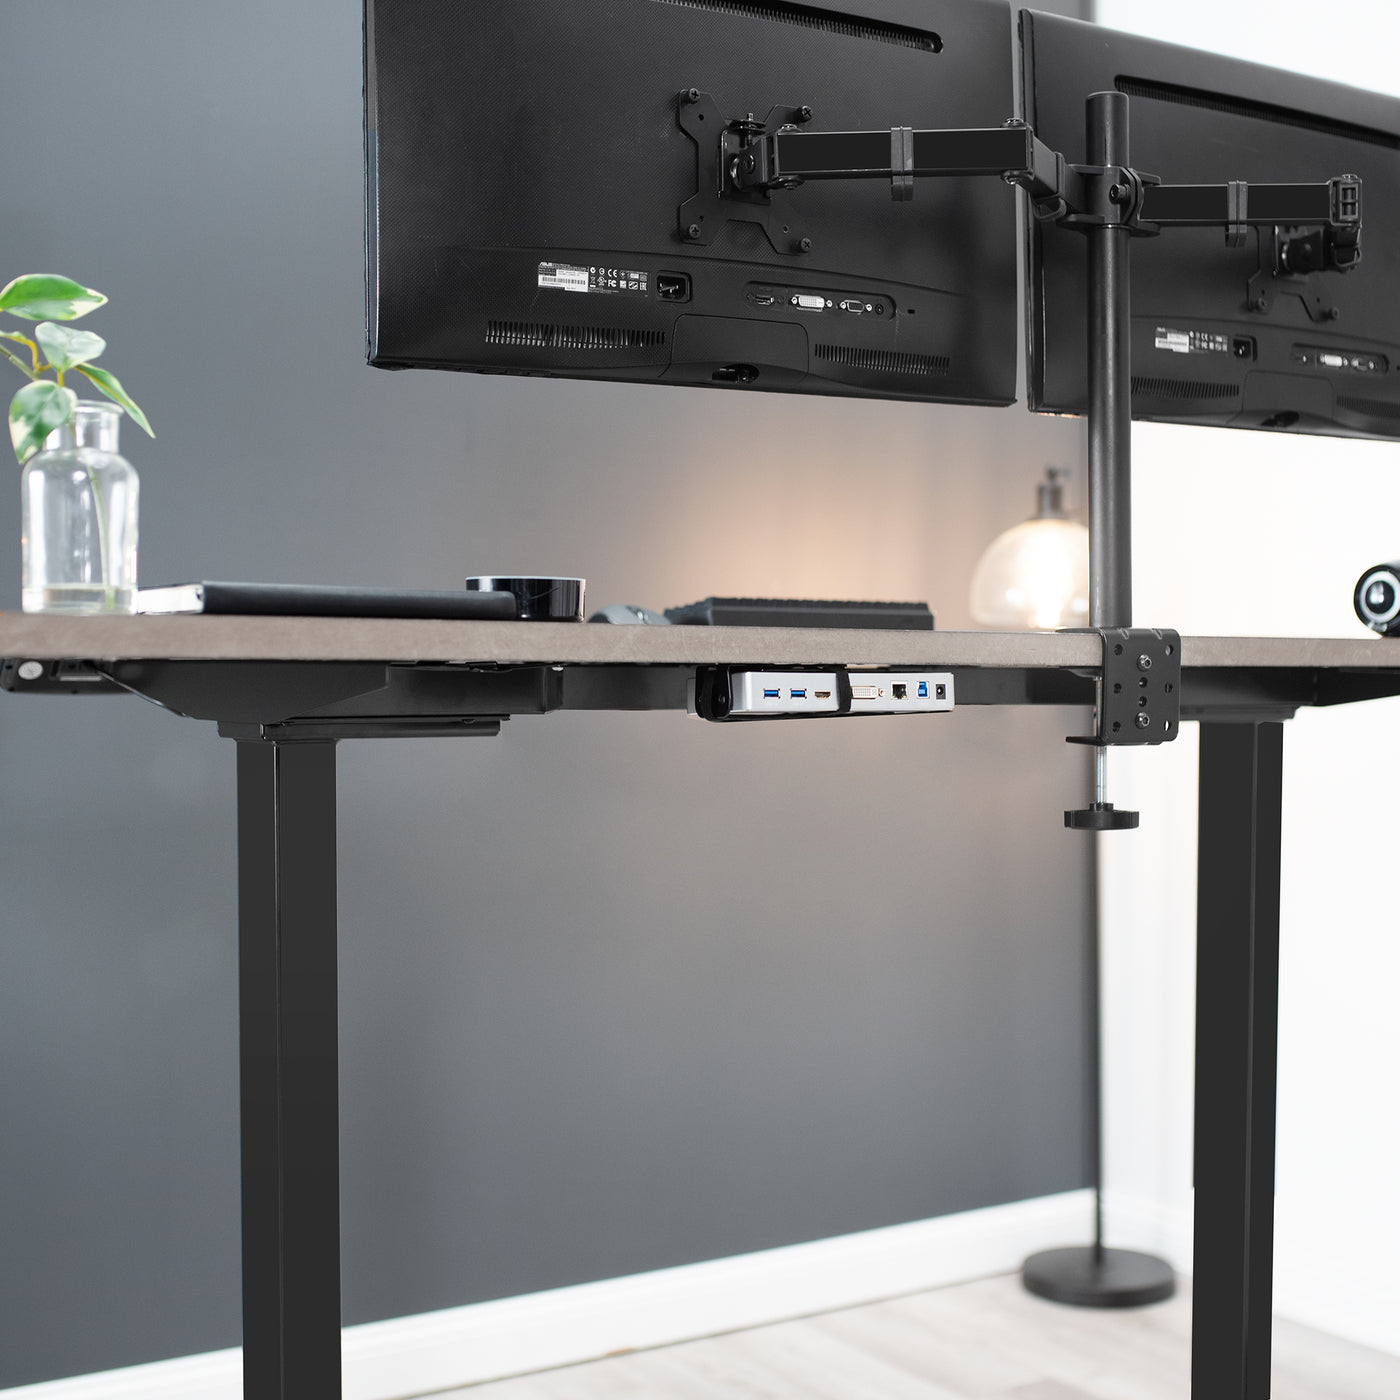 Reduce desk clutter and maintain a low profile set up with a back of monitor clamp on the docking station.